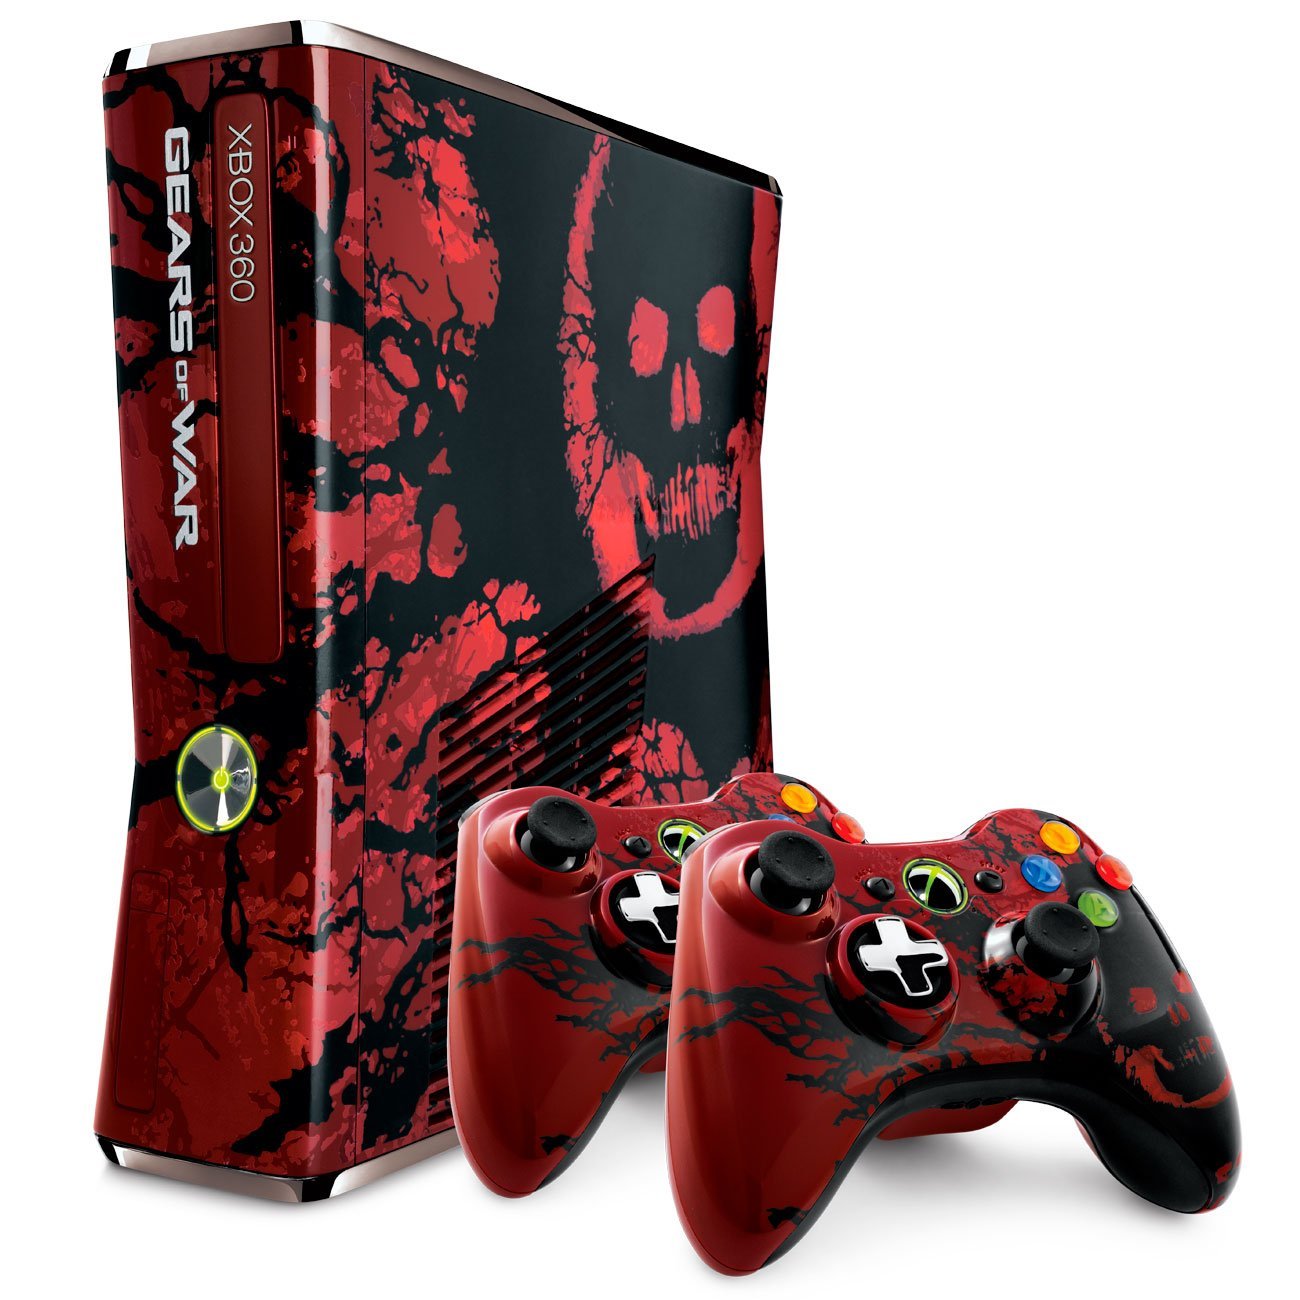 http://thetechjournal.com/wp-content/uploads/images/1108/1312642487-xbox-360-limited-edition-gears-of-war-3-wireless-controllers-2.jpg